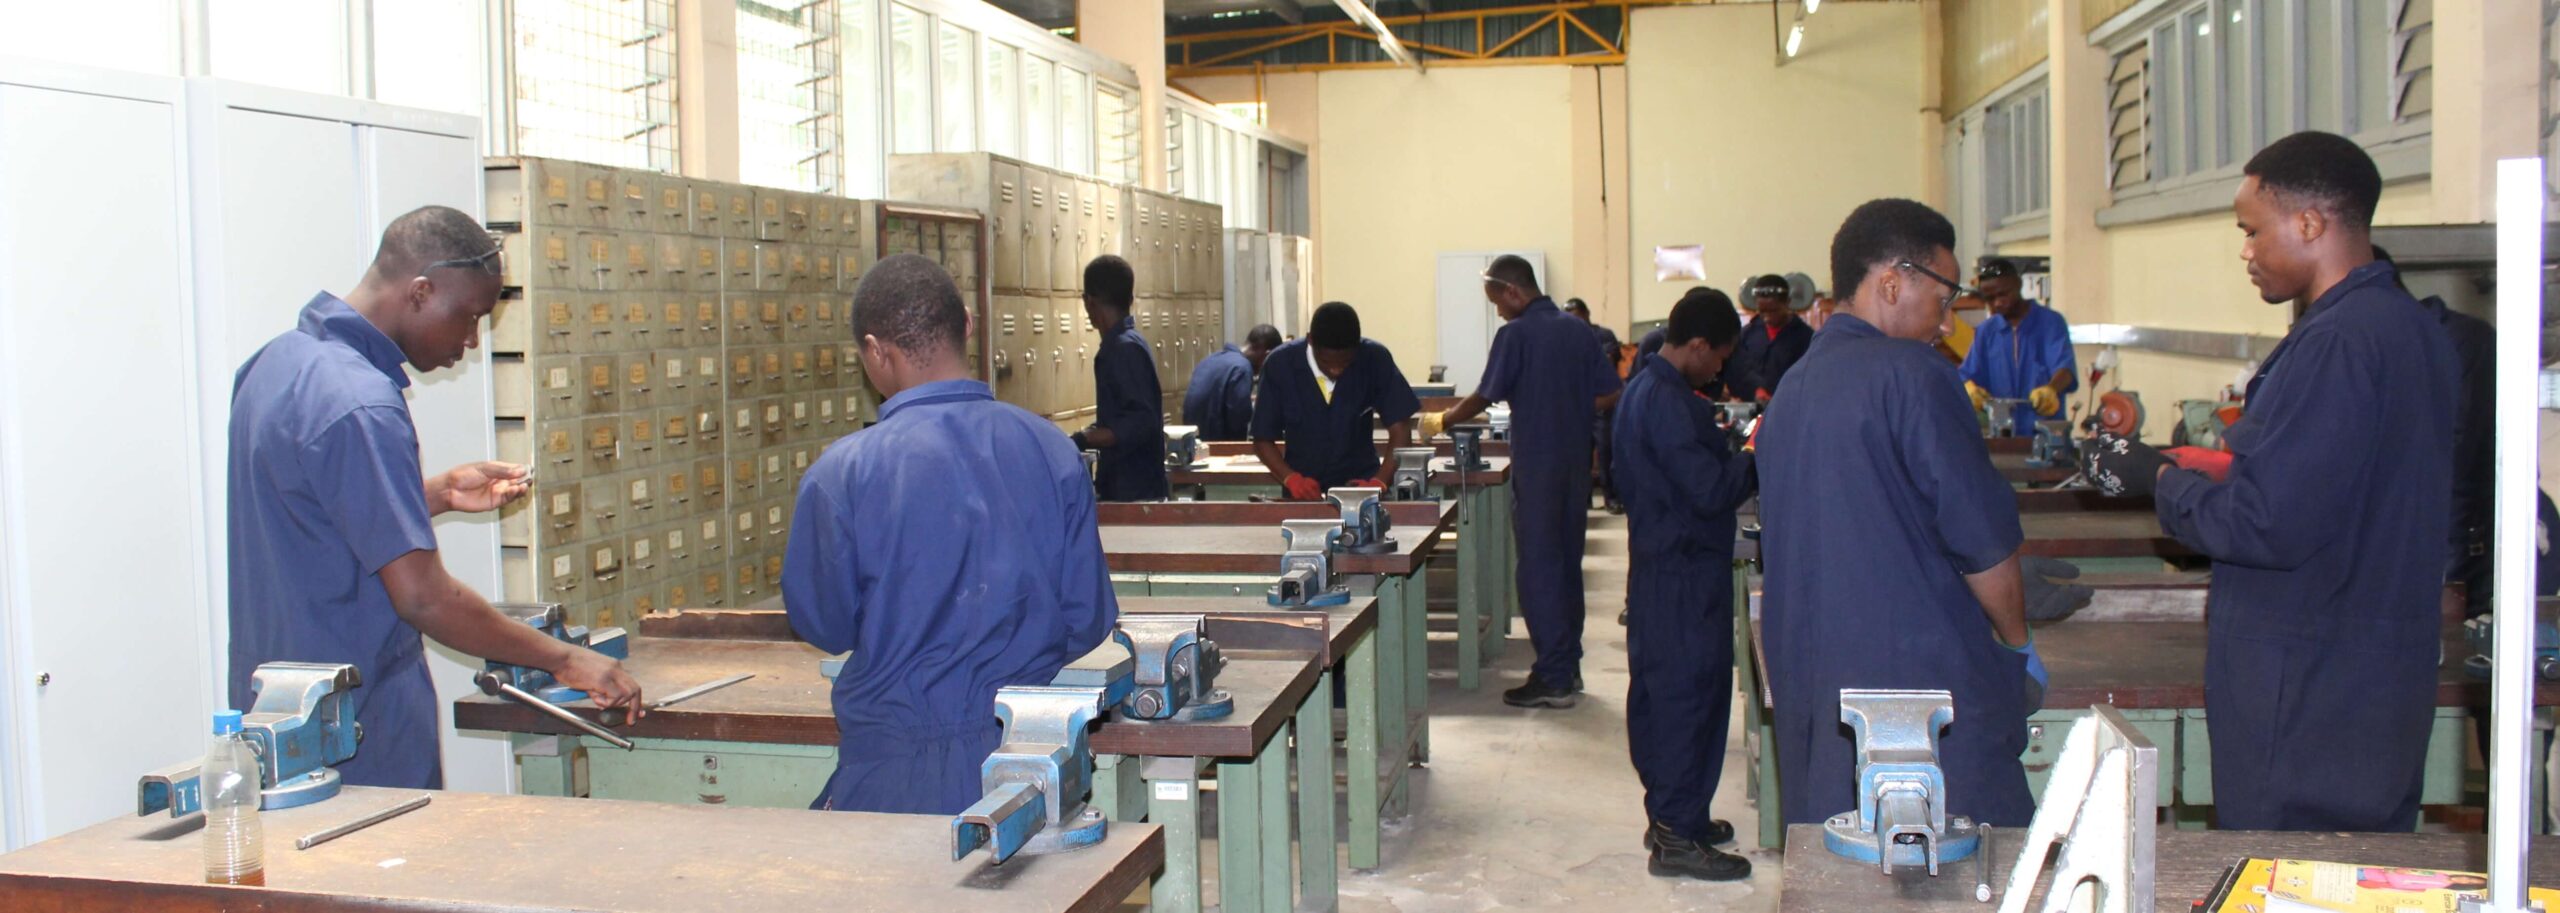 Students during a practical session at Arusha Technical College